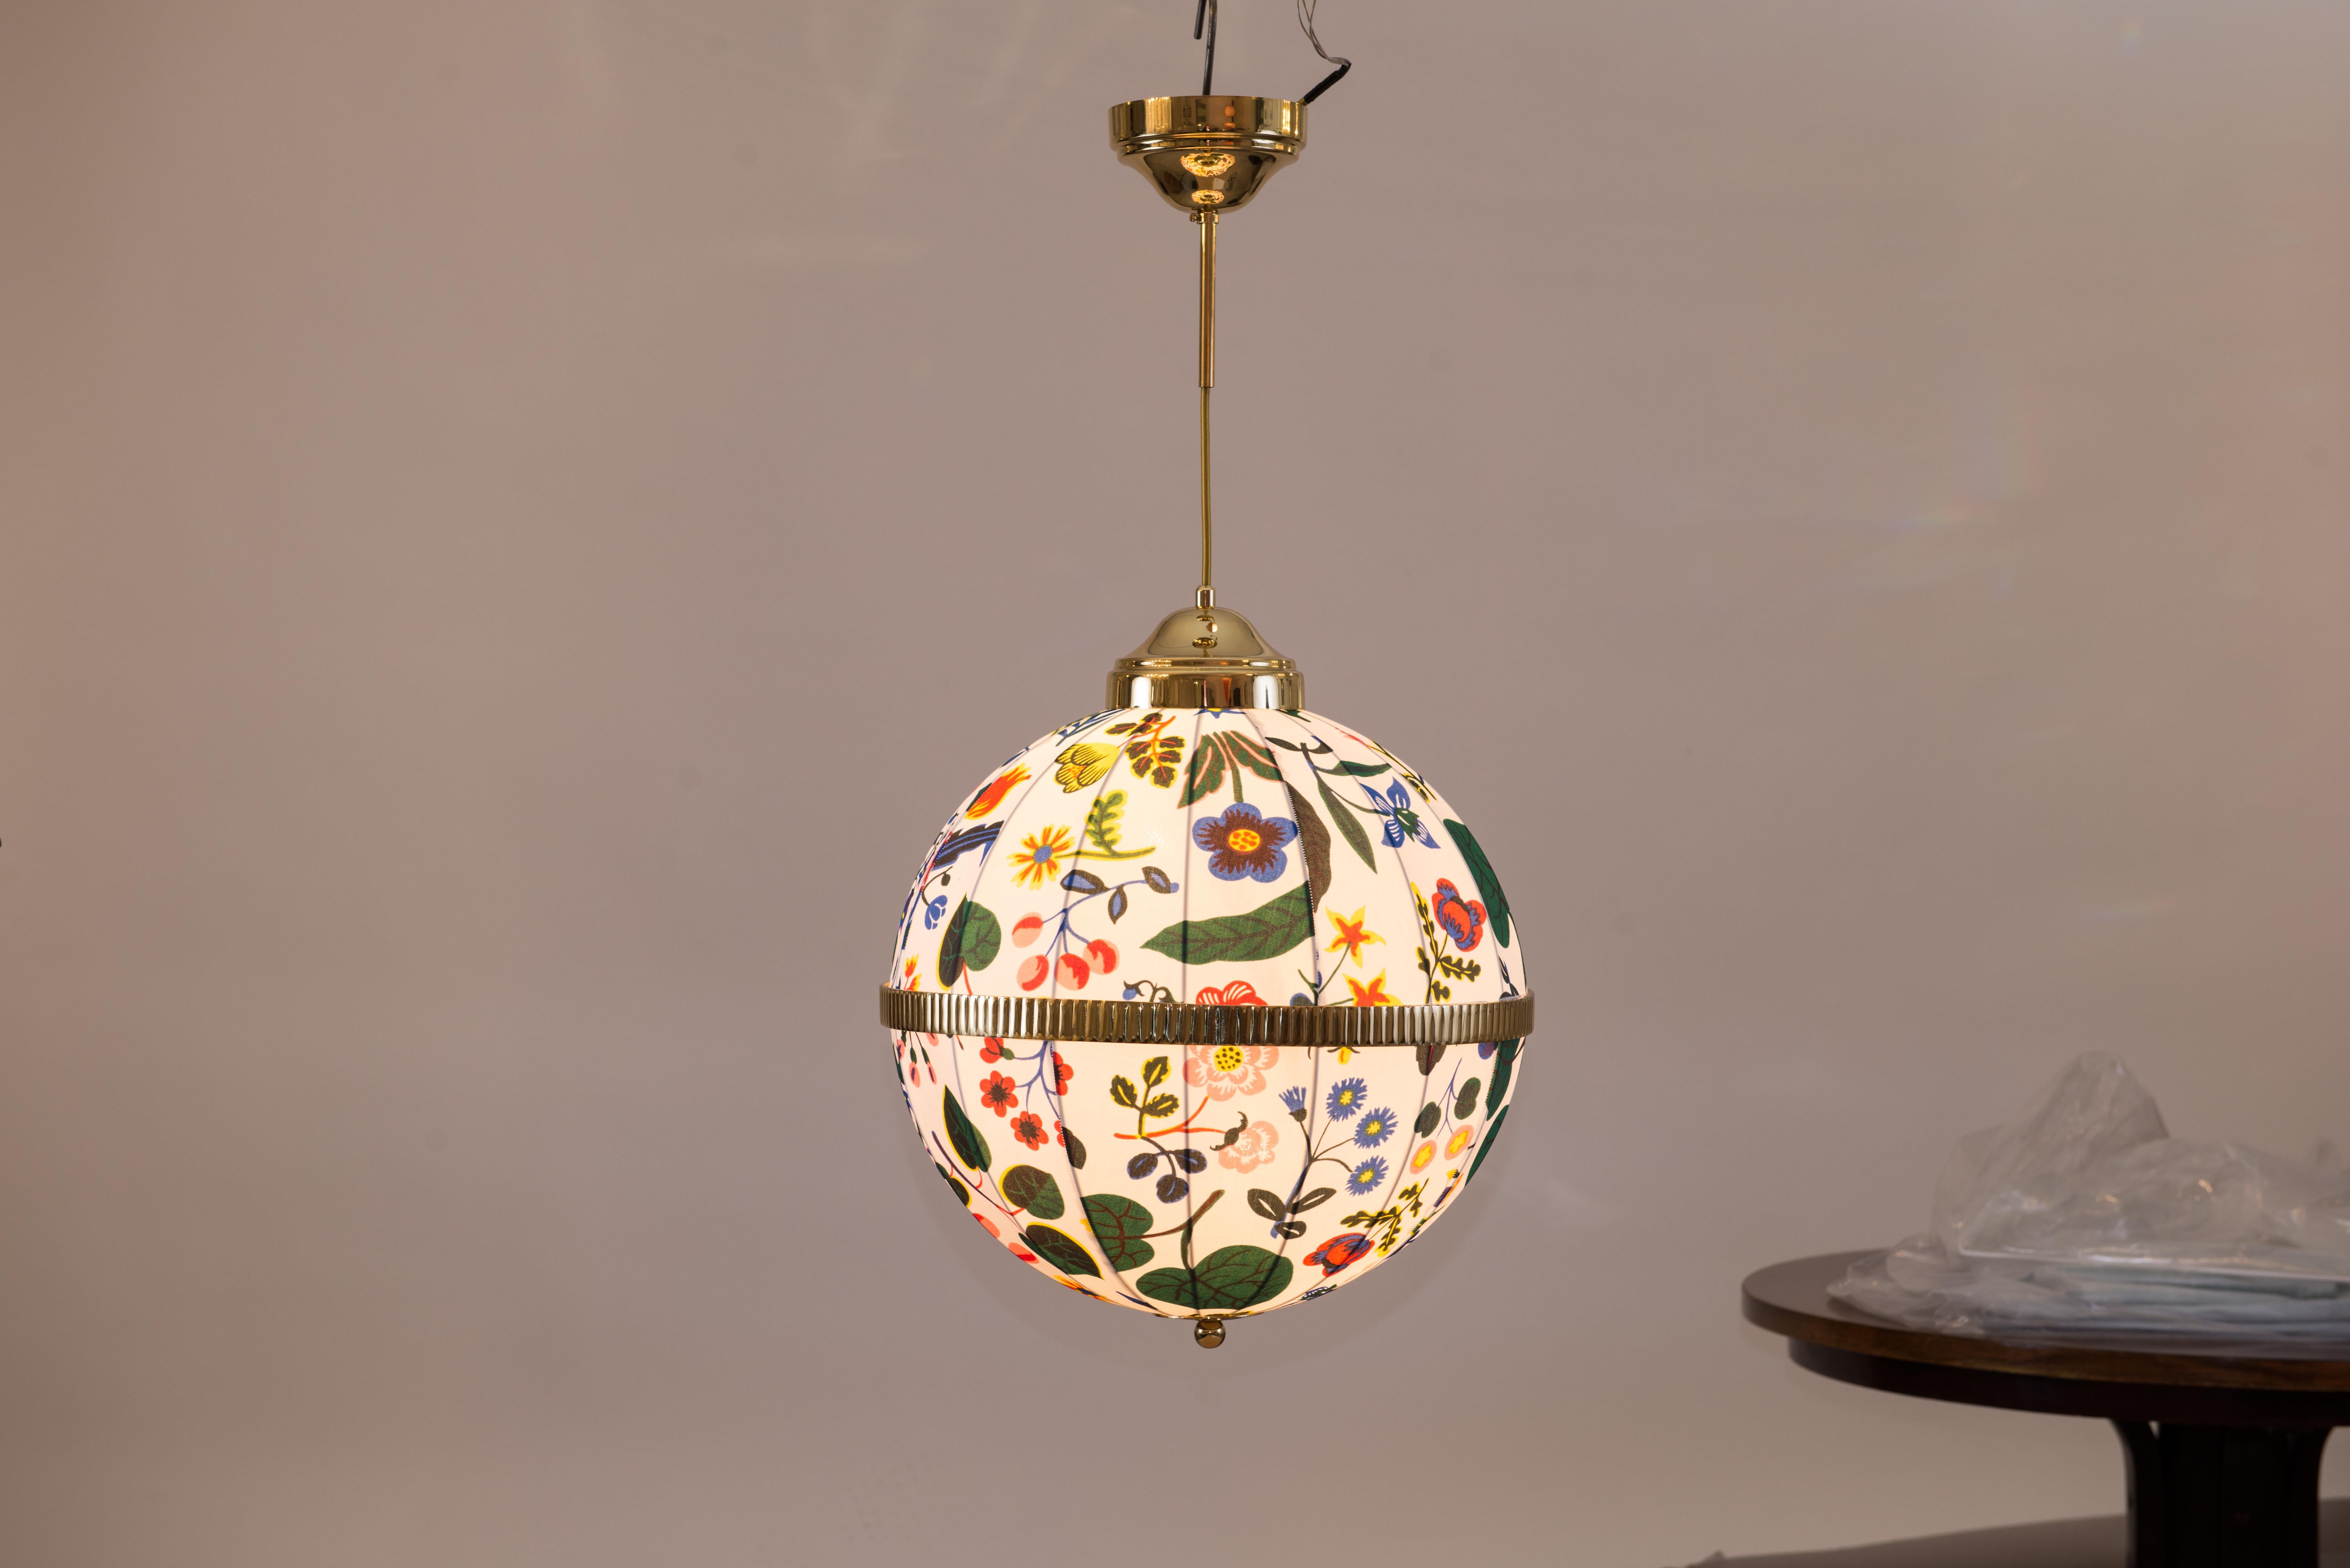 Handsewn fabric shade, dessin by Josef Frank for Svenskt Tenn, hanging on a fabric-covered wire, brass-parts in the requested finish.
Total drop custom made
2 x Edison screw sockets E12/E14 for incandescent or LED
Most components according to the UL